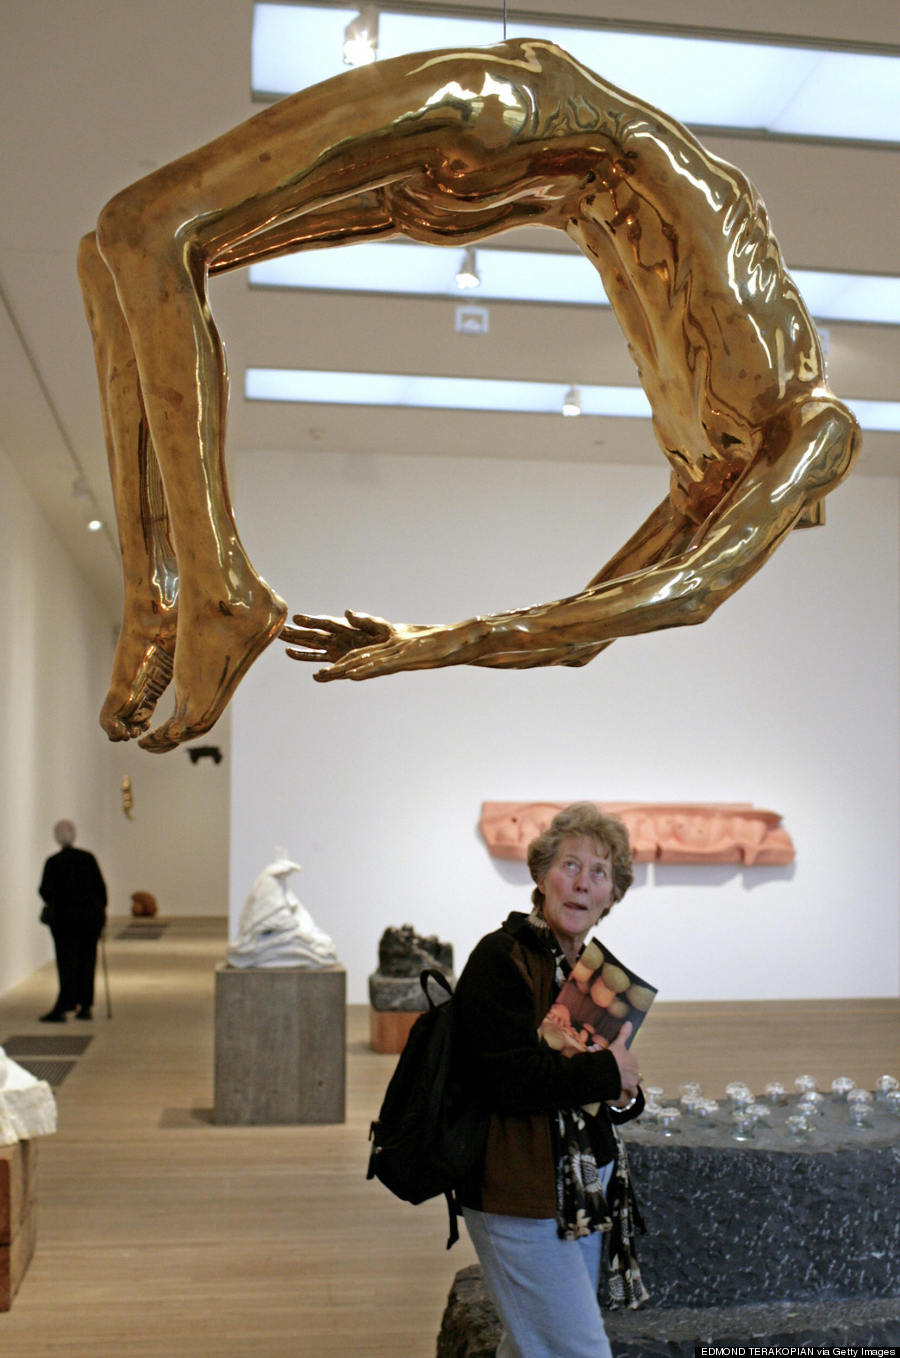 Sculptor Louise Bourgeois plumbed depths of female psyche, made